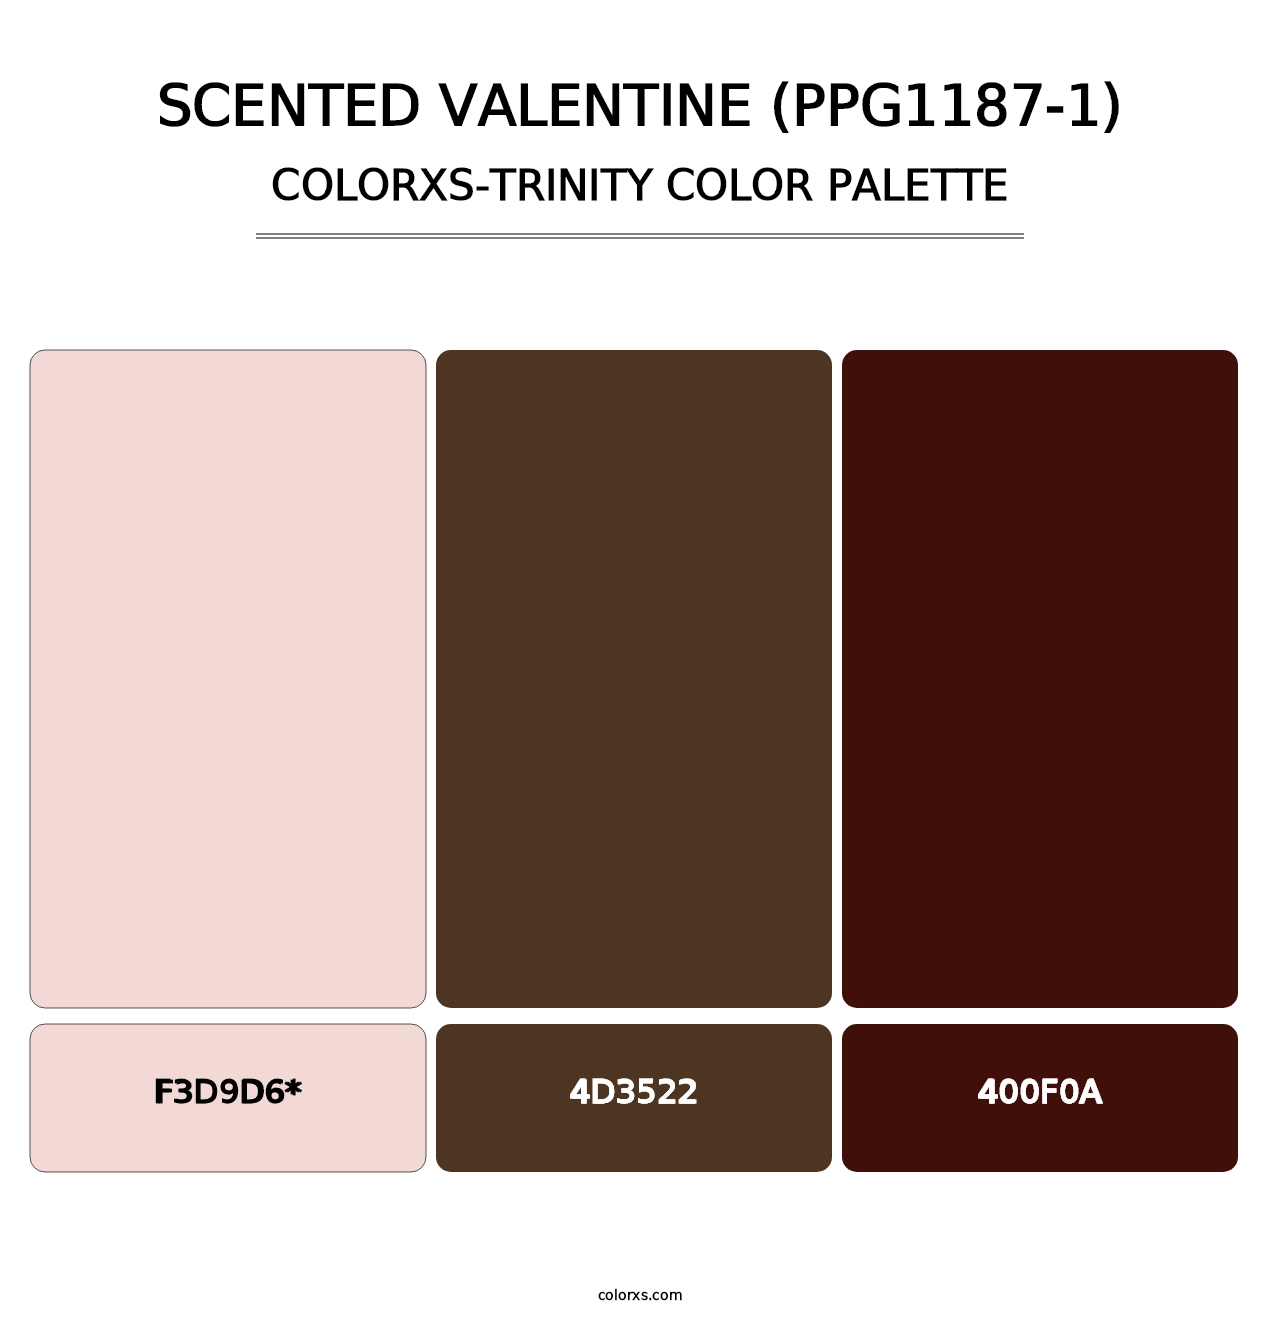 Scented Valentine (PPG1187-1) - Colorxs Trinity Palette